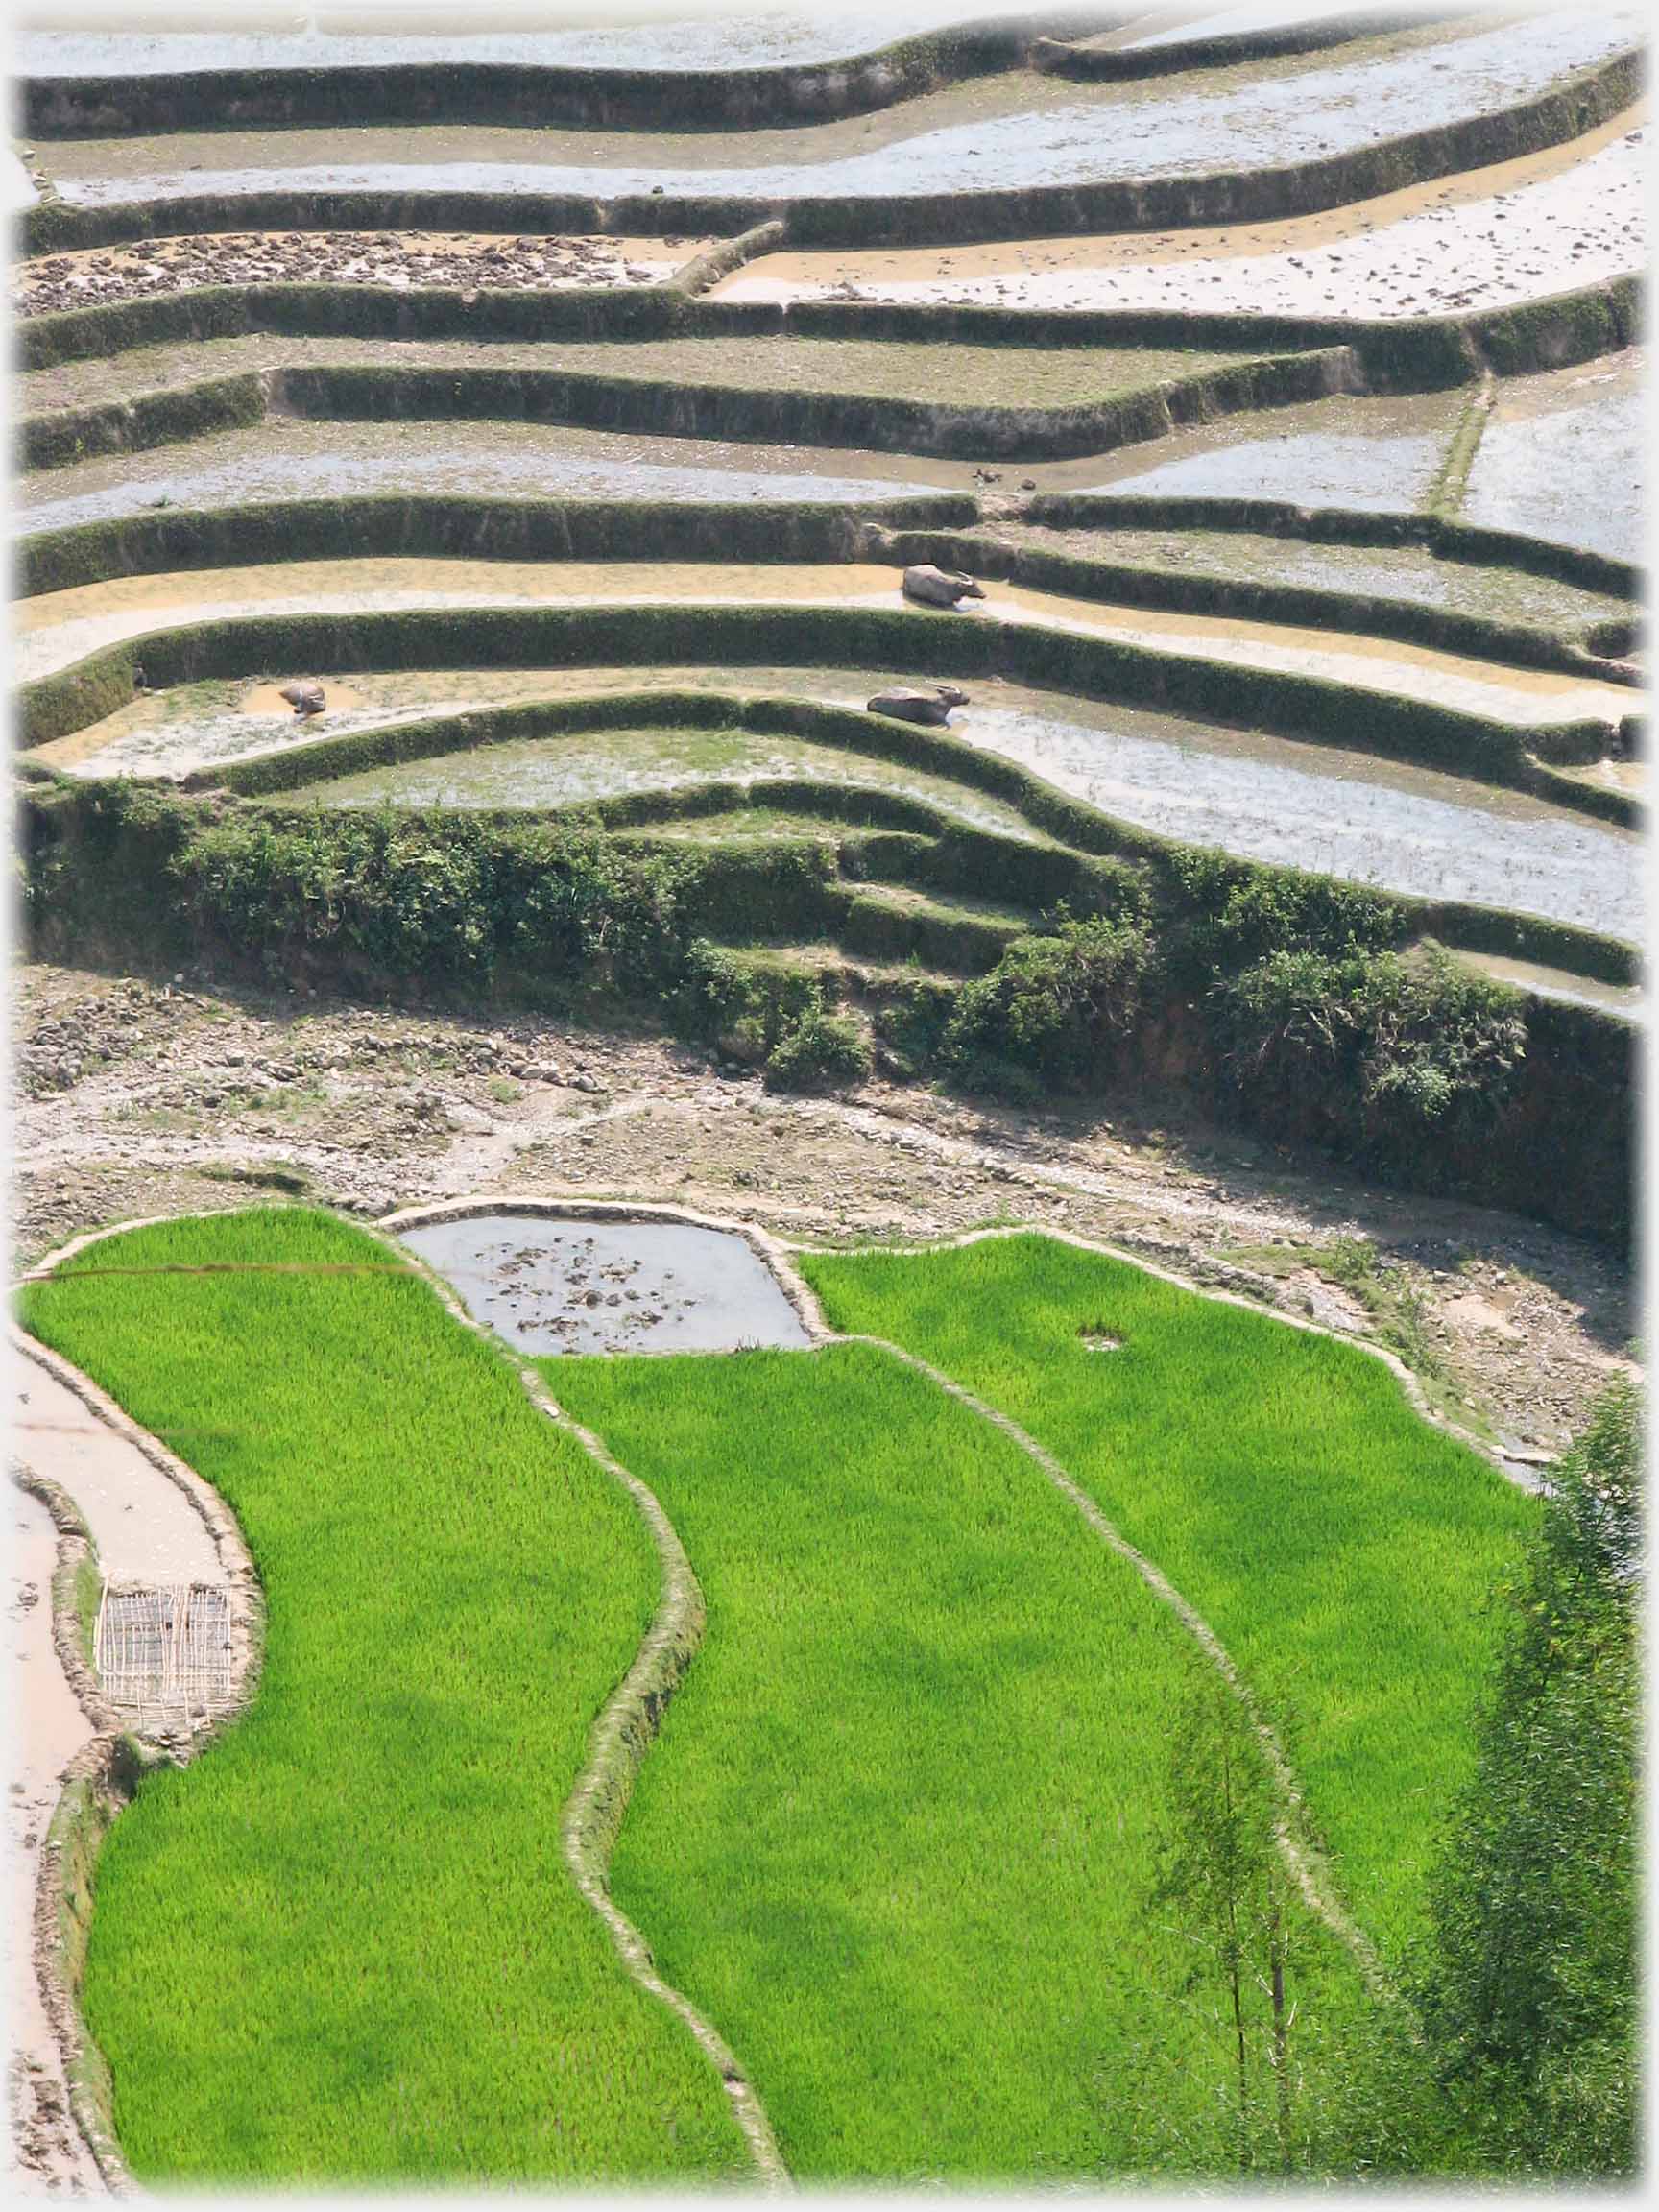 Terraced mud fields with buffalo and in foreground three dense green fields.